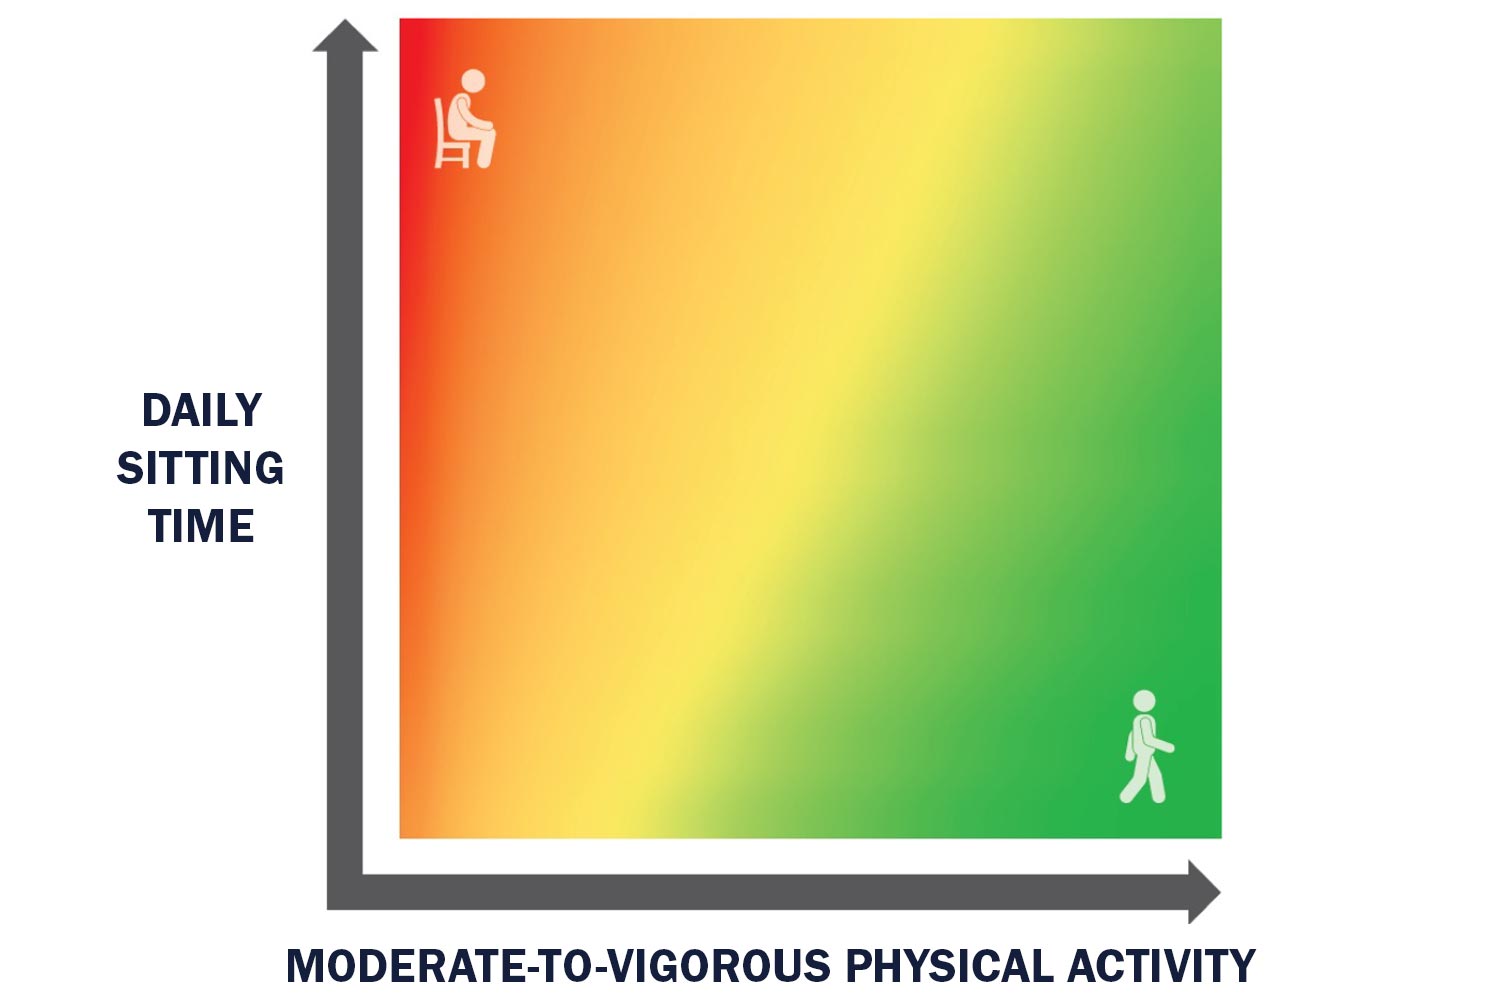 Heat map moving red to green from left to right. Vertical axis: Daily Sitting Time. Horizontal axis: Moderate-to-Vigorous Physical Activity